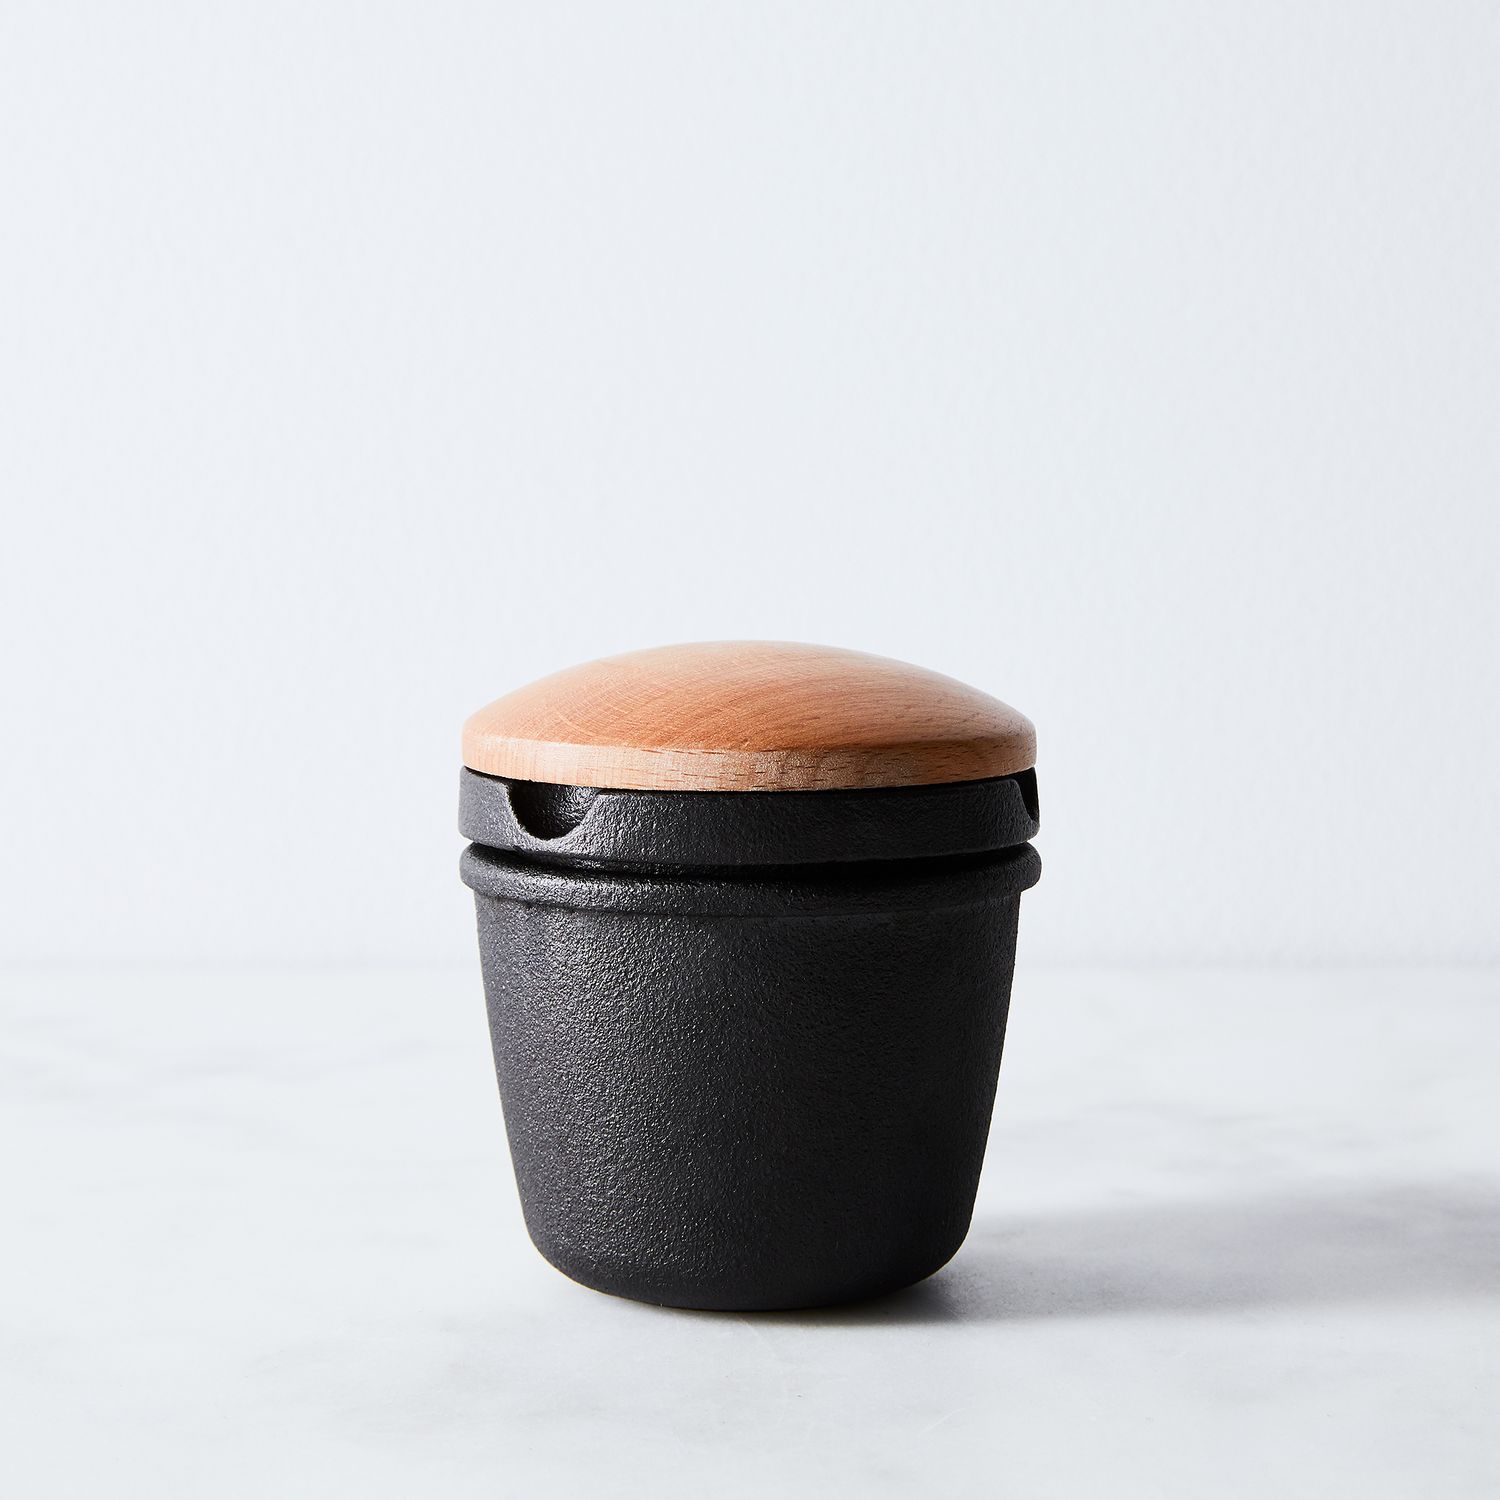 Black cast iron spice grinder with a wooden lid on a white surface.